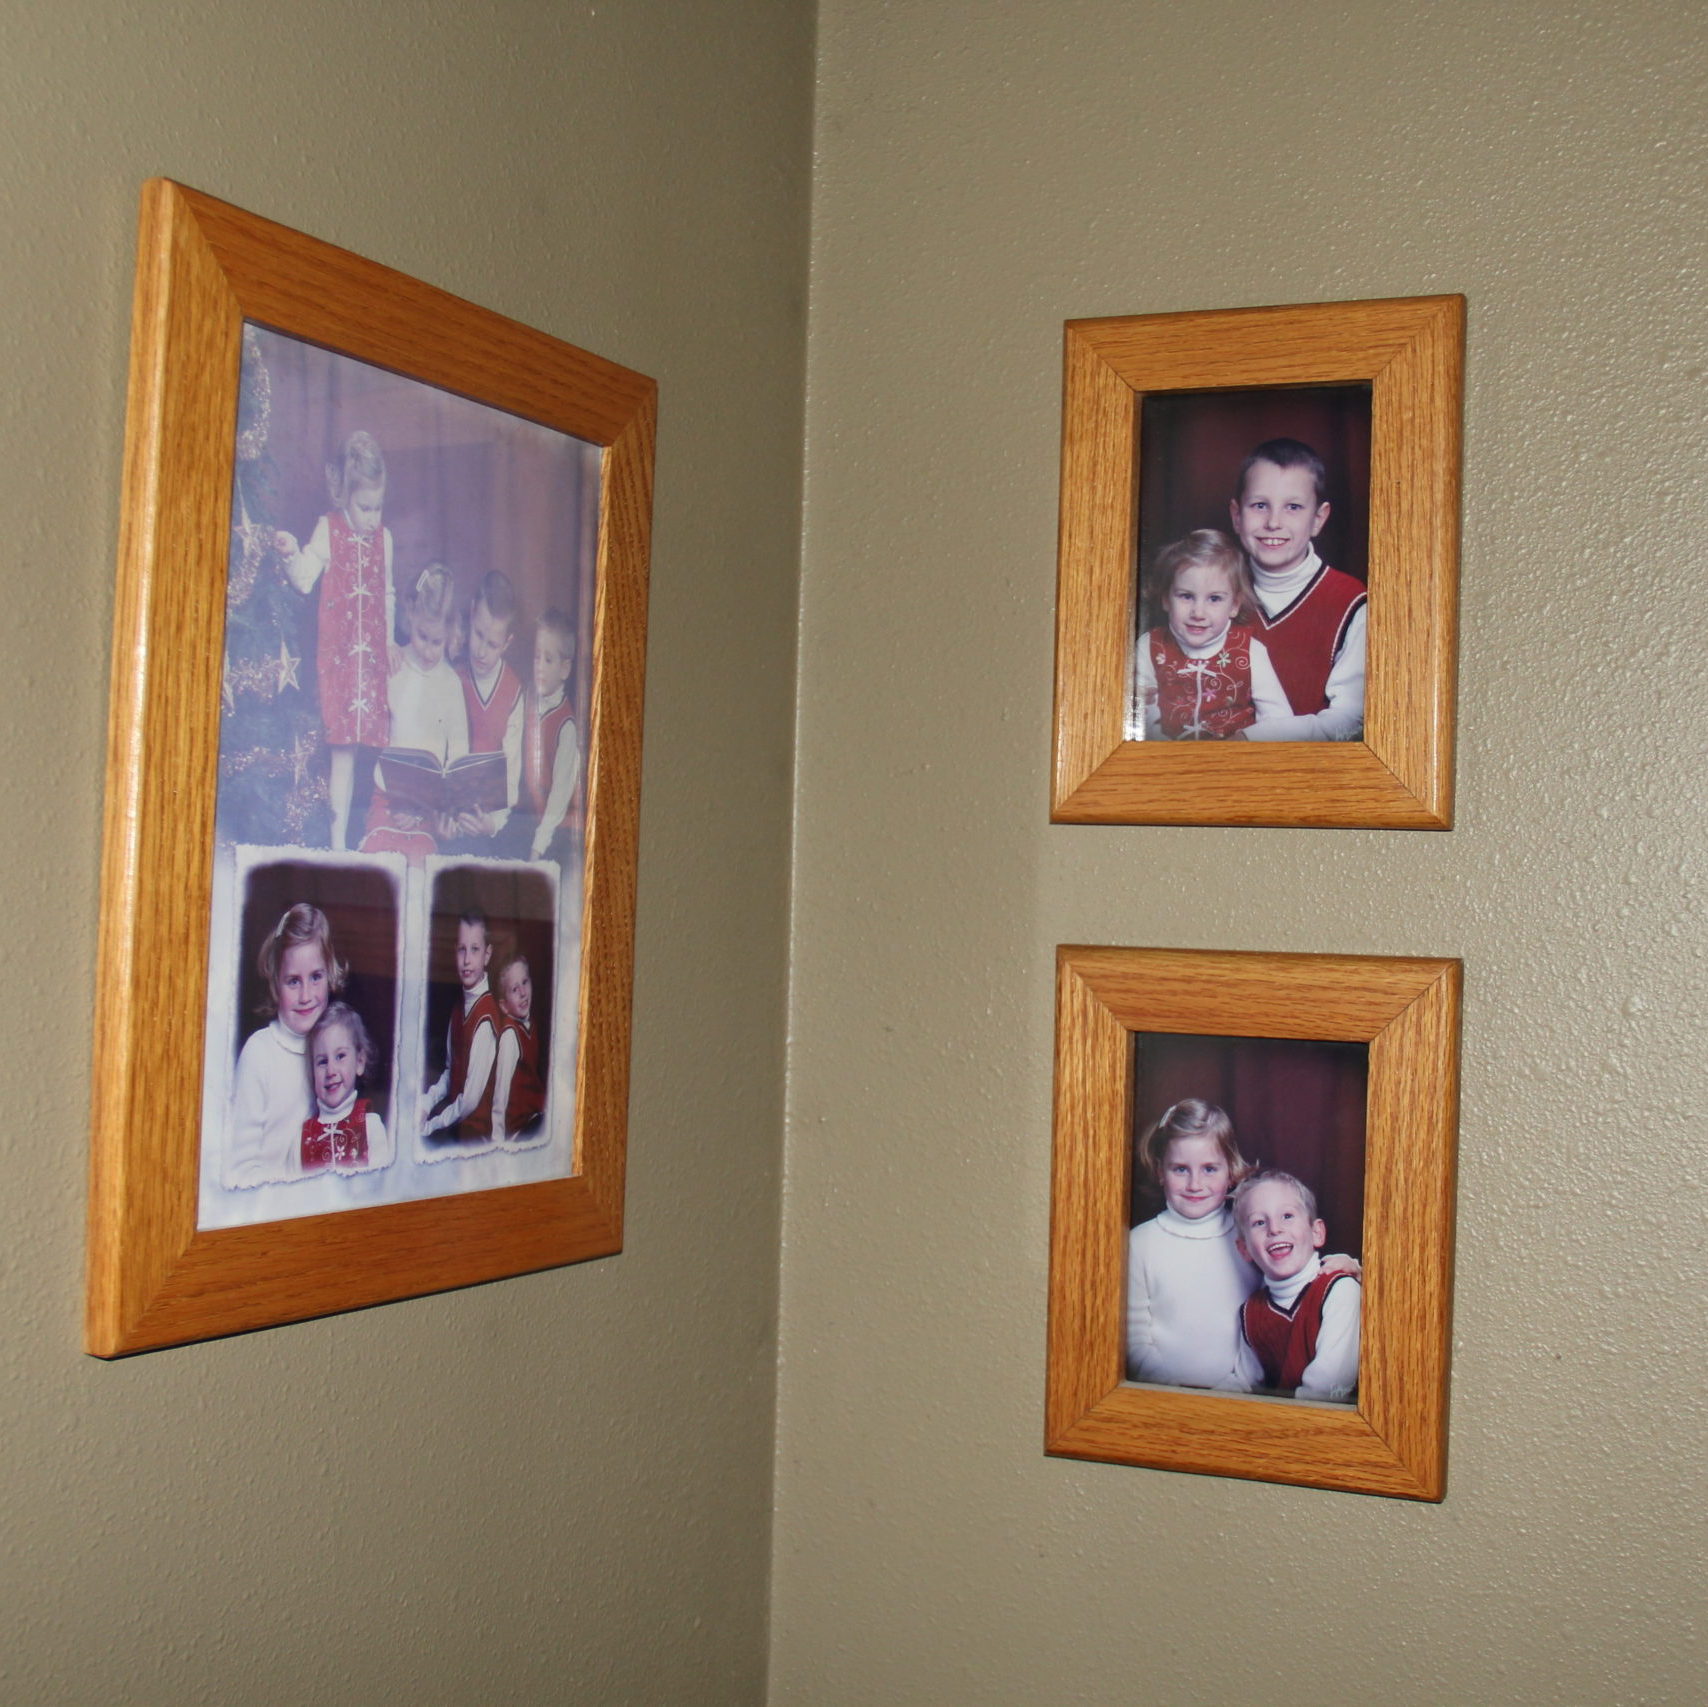 In the corner of my bedroom hangs this set of photos. They are precious to me in many ways. The frames were made by Dave and the pictures captured a time I love to remember. Christmas 2003